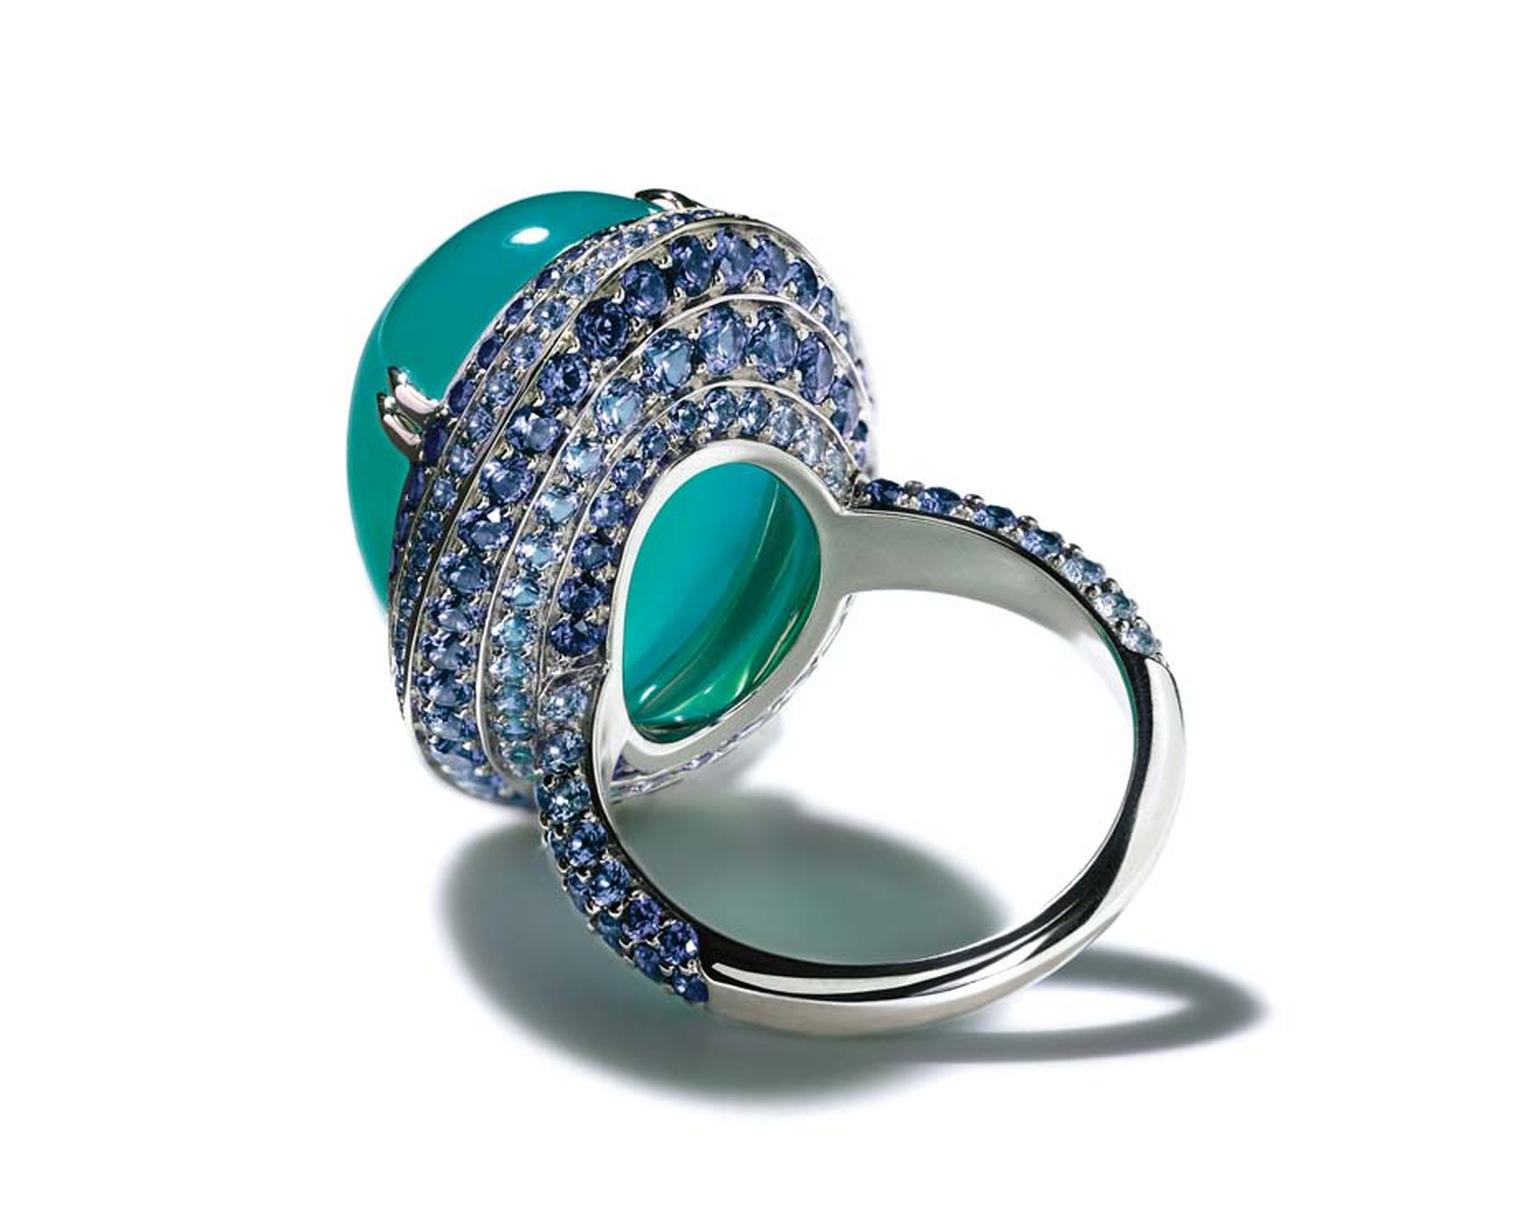 The open back in the platinum setting of Tiffany's Chrysocolla ring, from its Blue Book collection, allows the ocean hues of the gemstone to shine through.